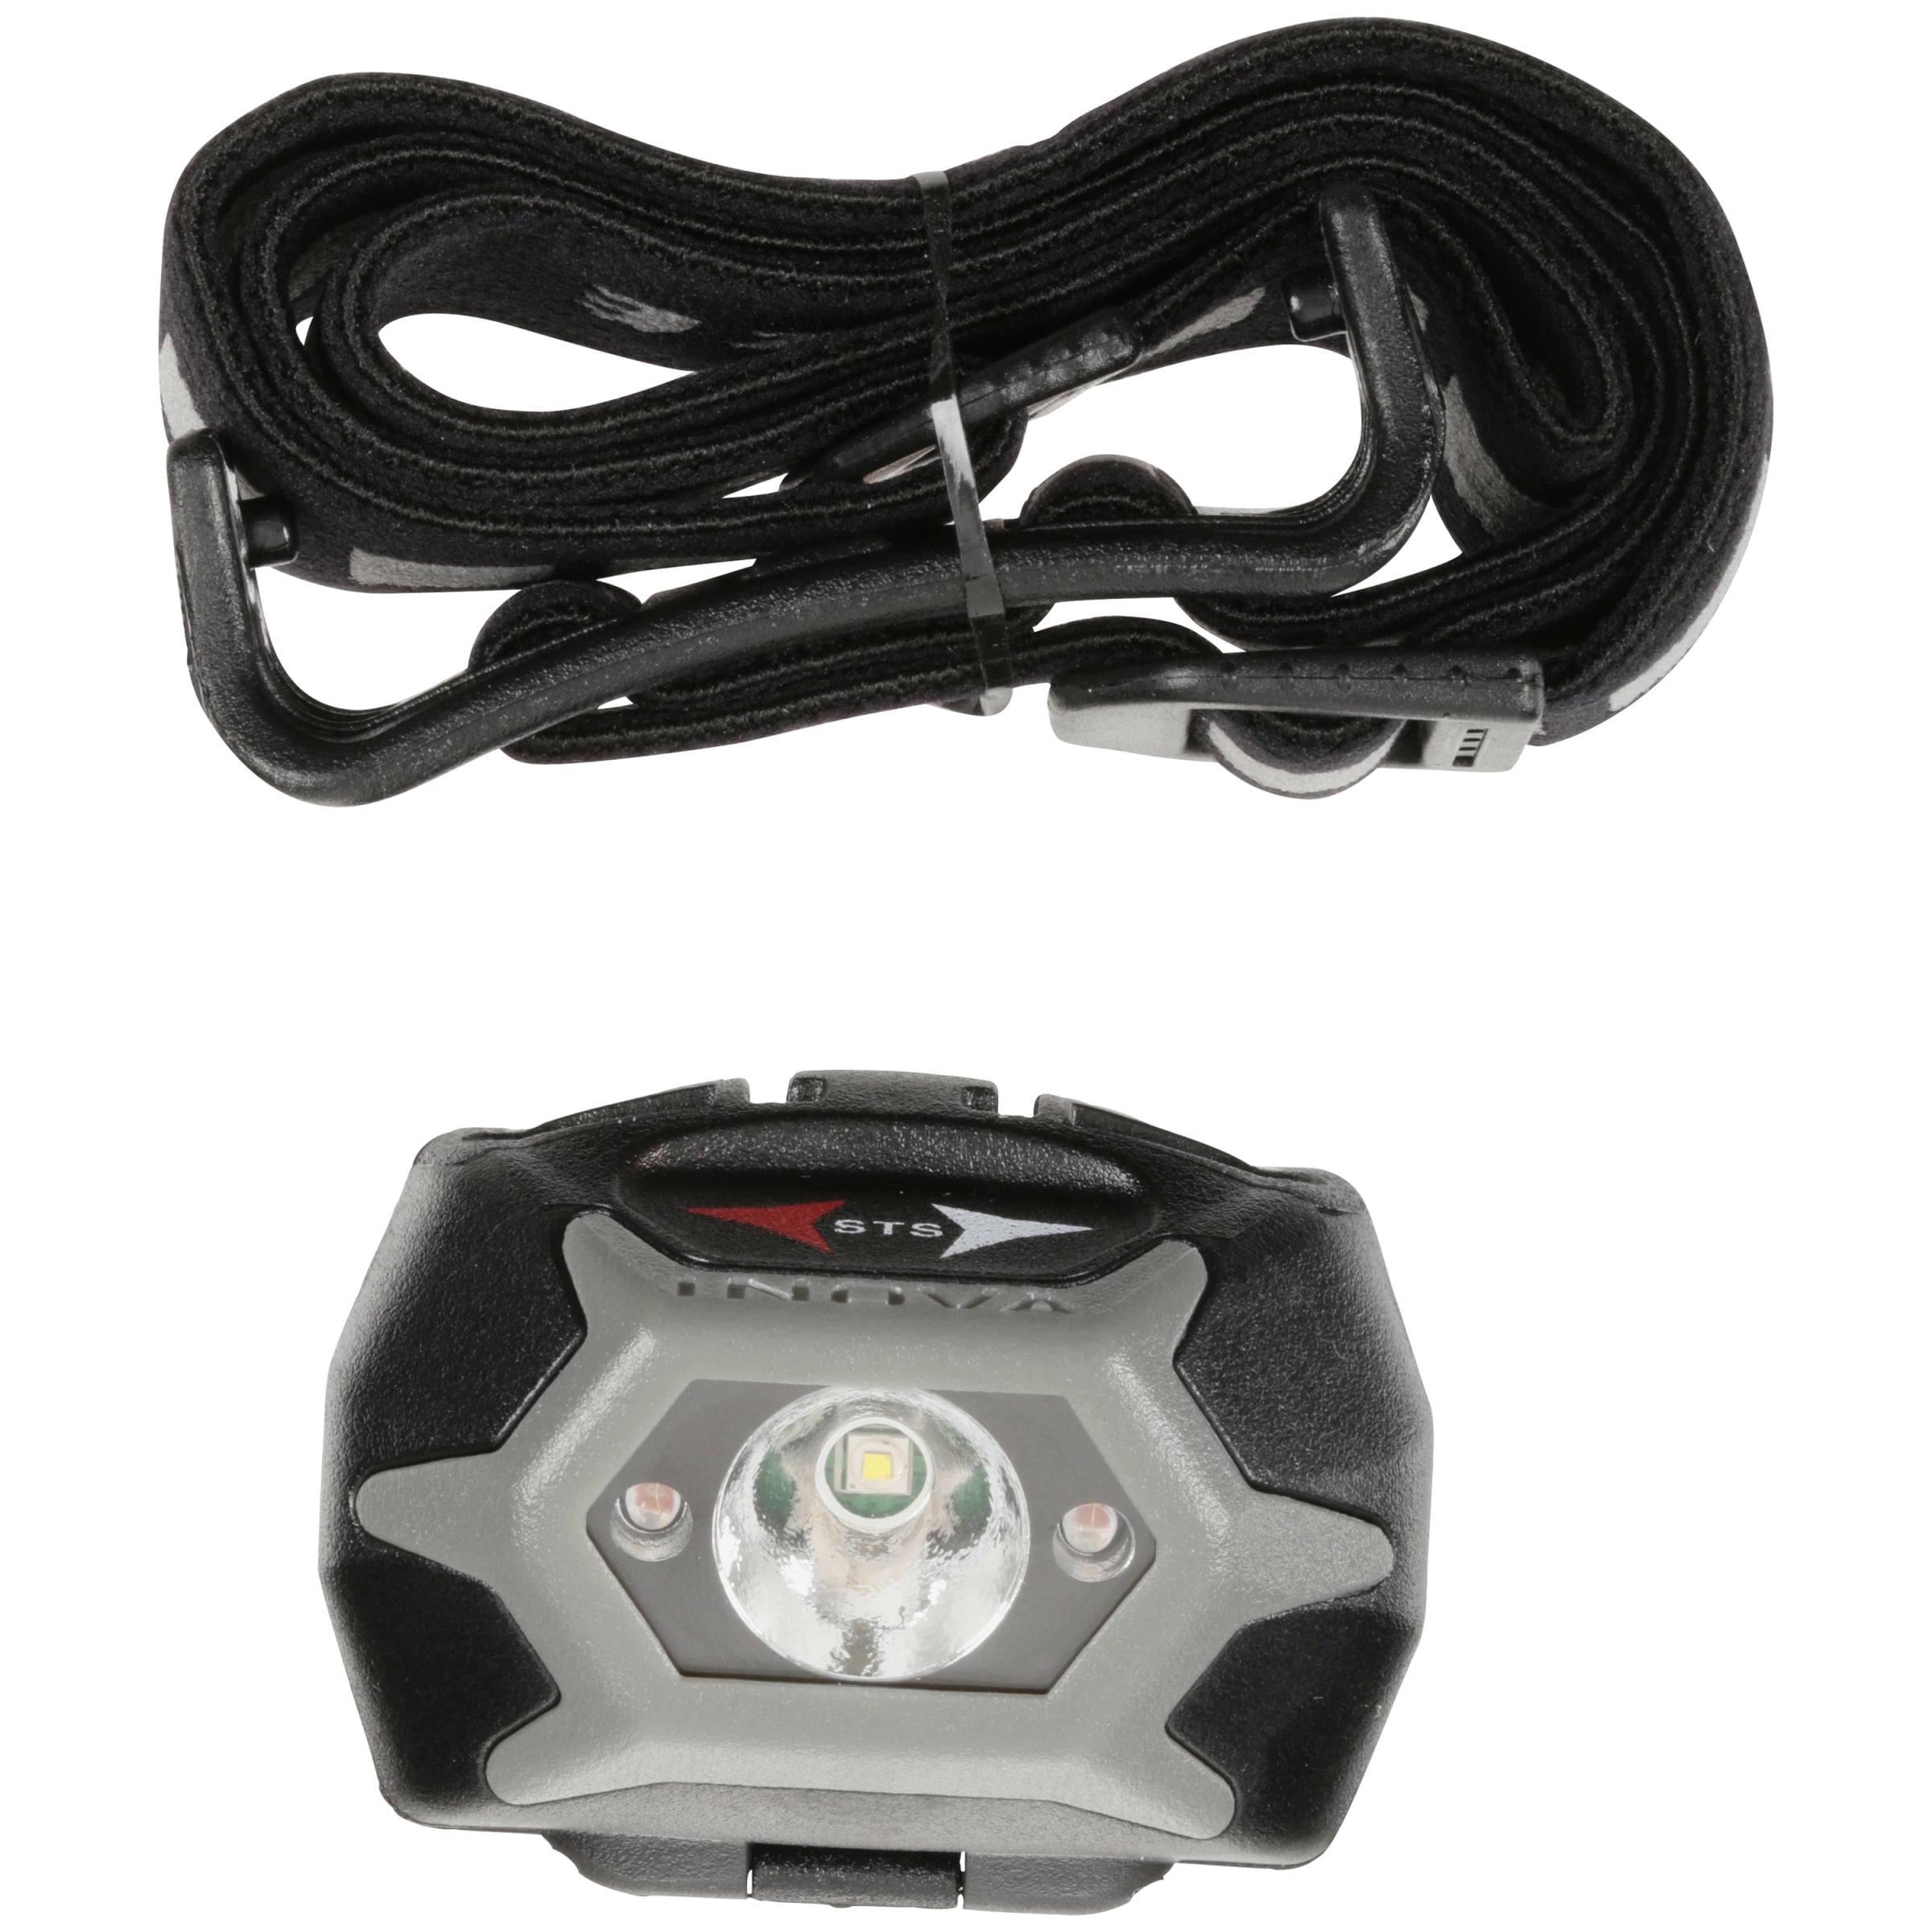 Inova STS Headlamp Charcoal Black and charcoal impact resistant polycarbonate bo 